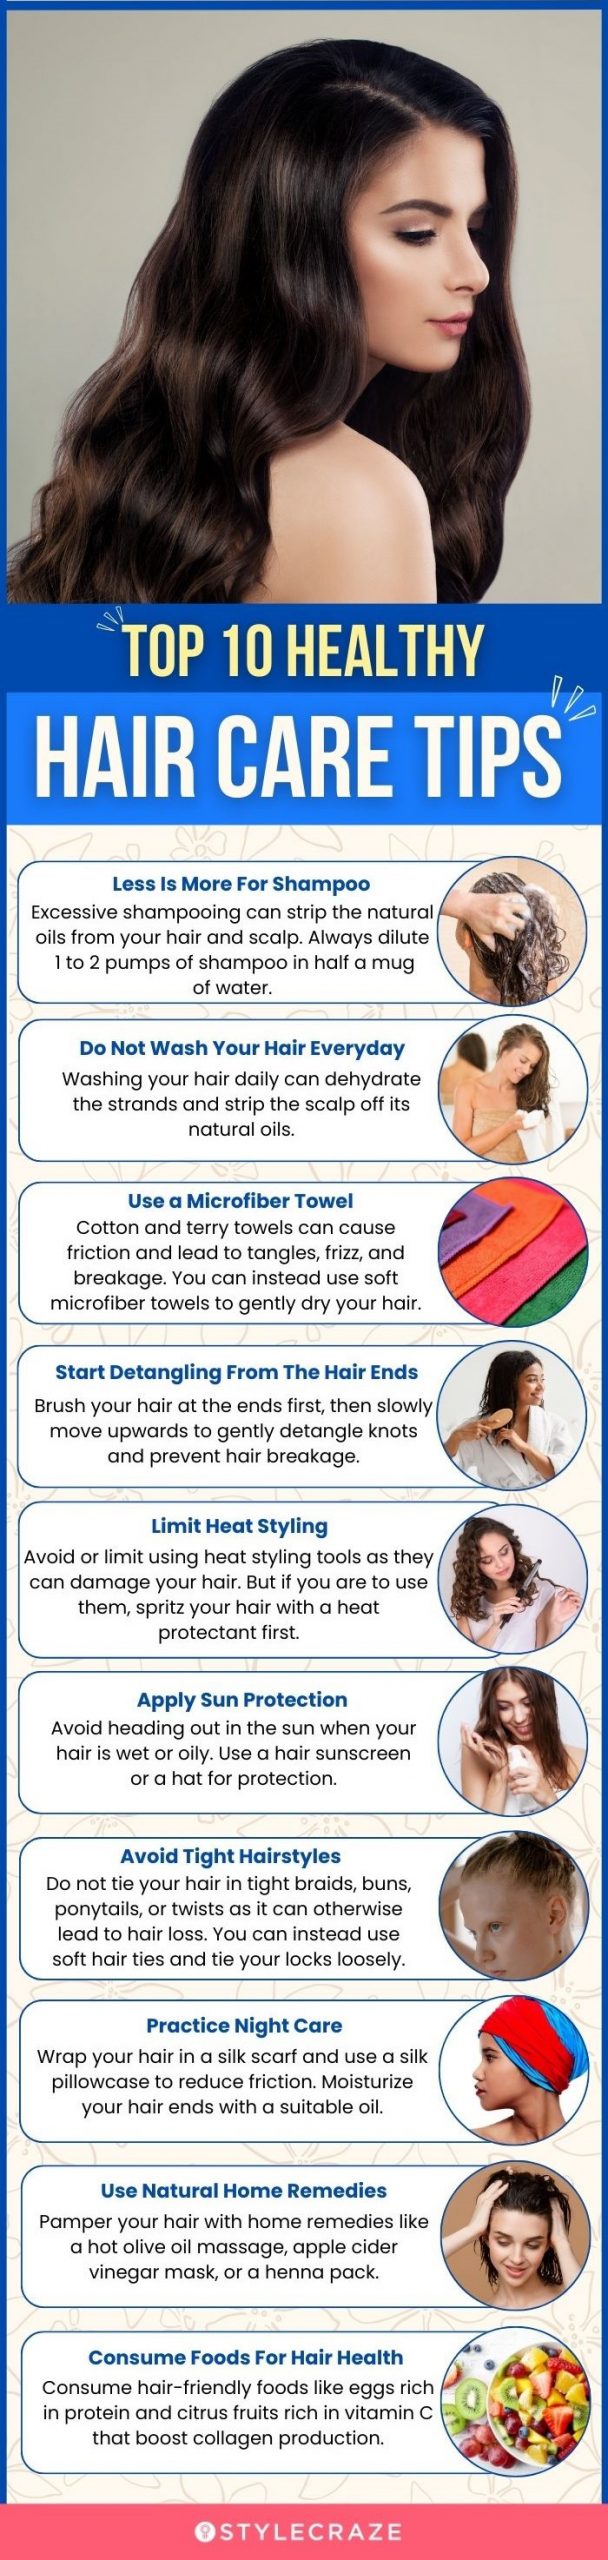 top 10 healthy hair care tips (infographic)